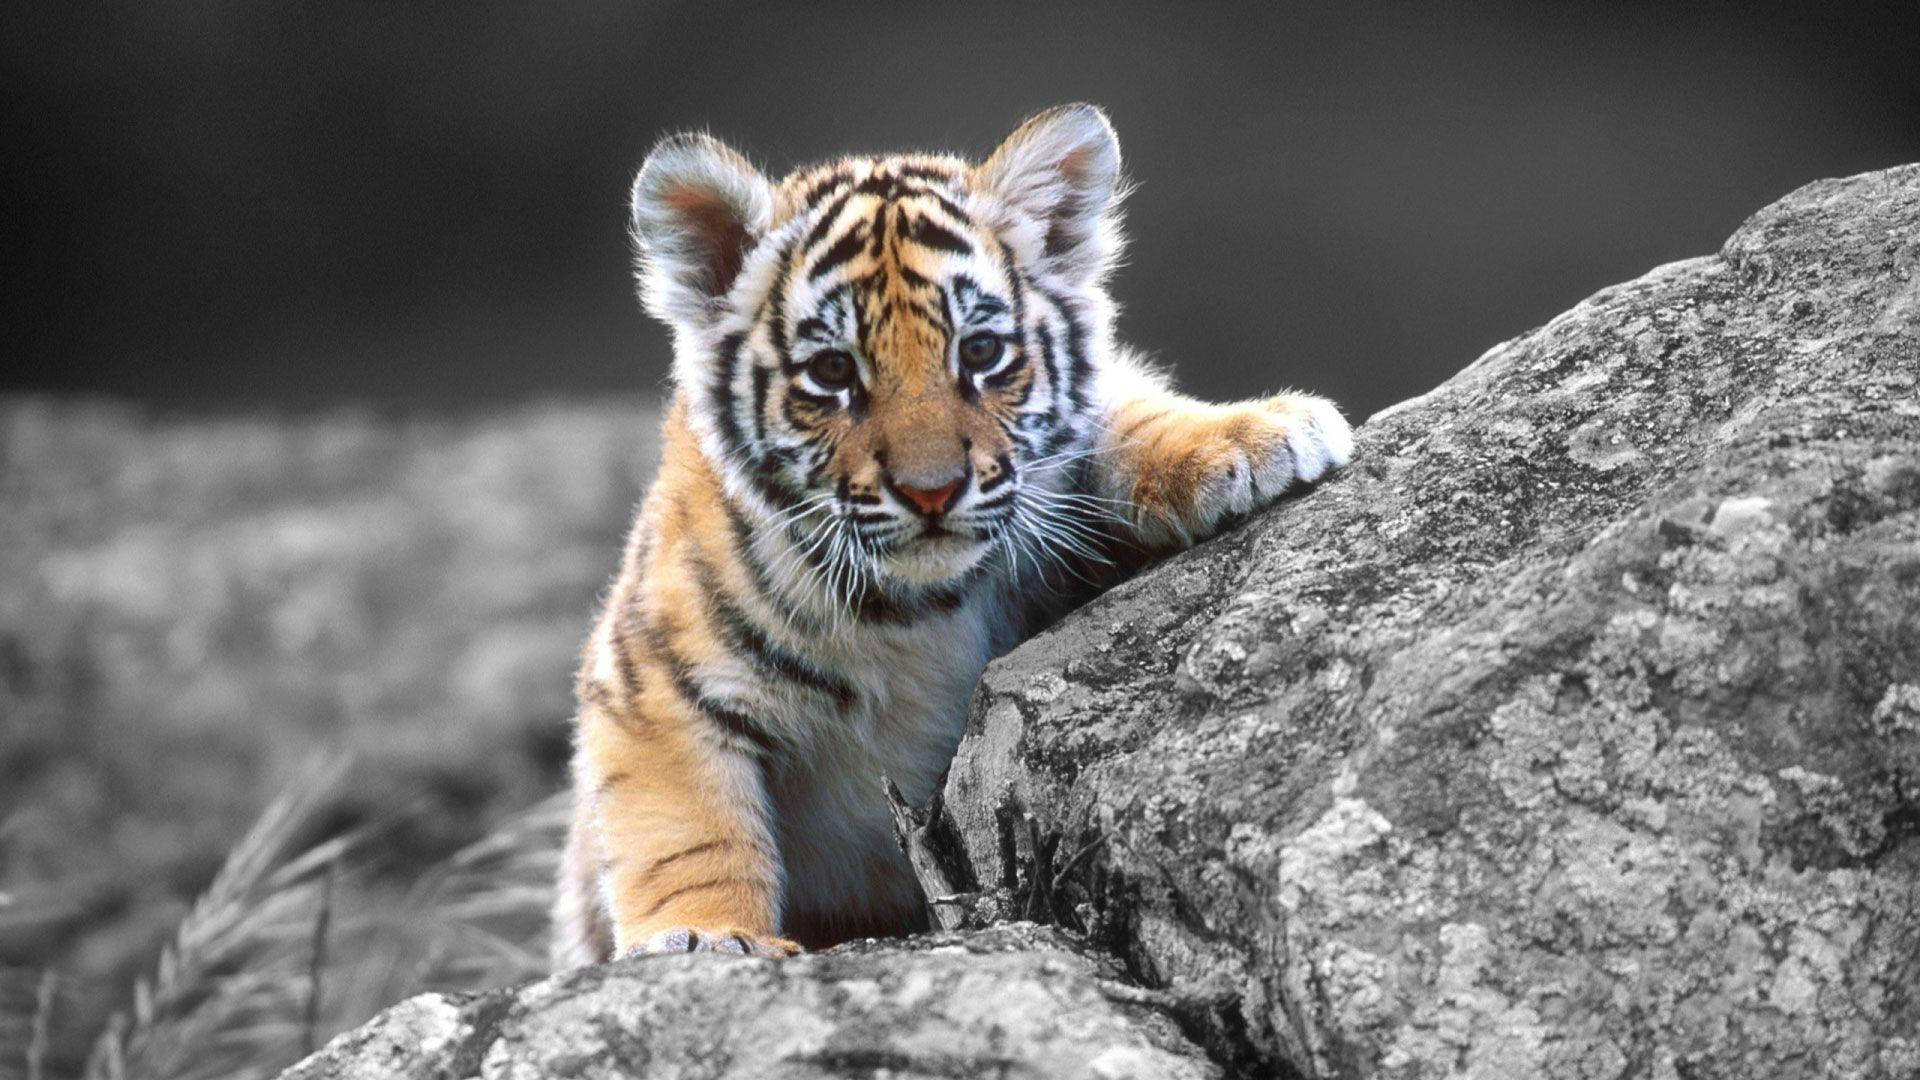 Baby Tiger Climbing Rock Background